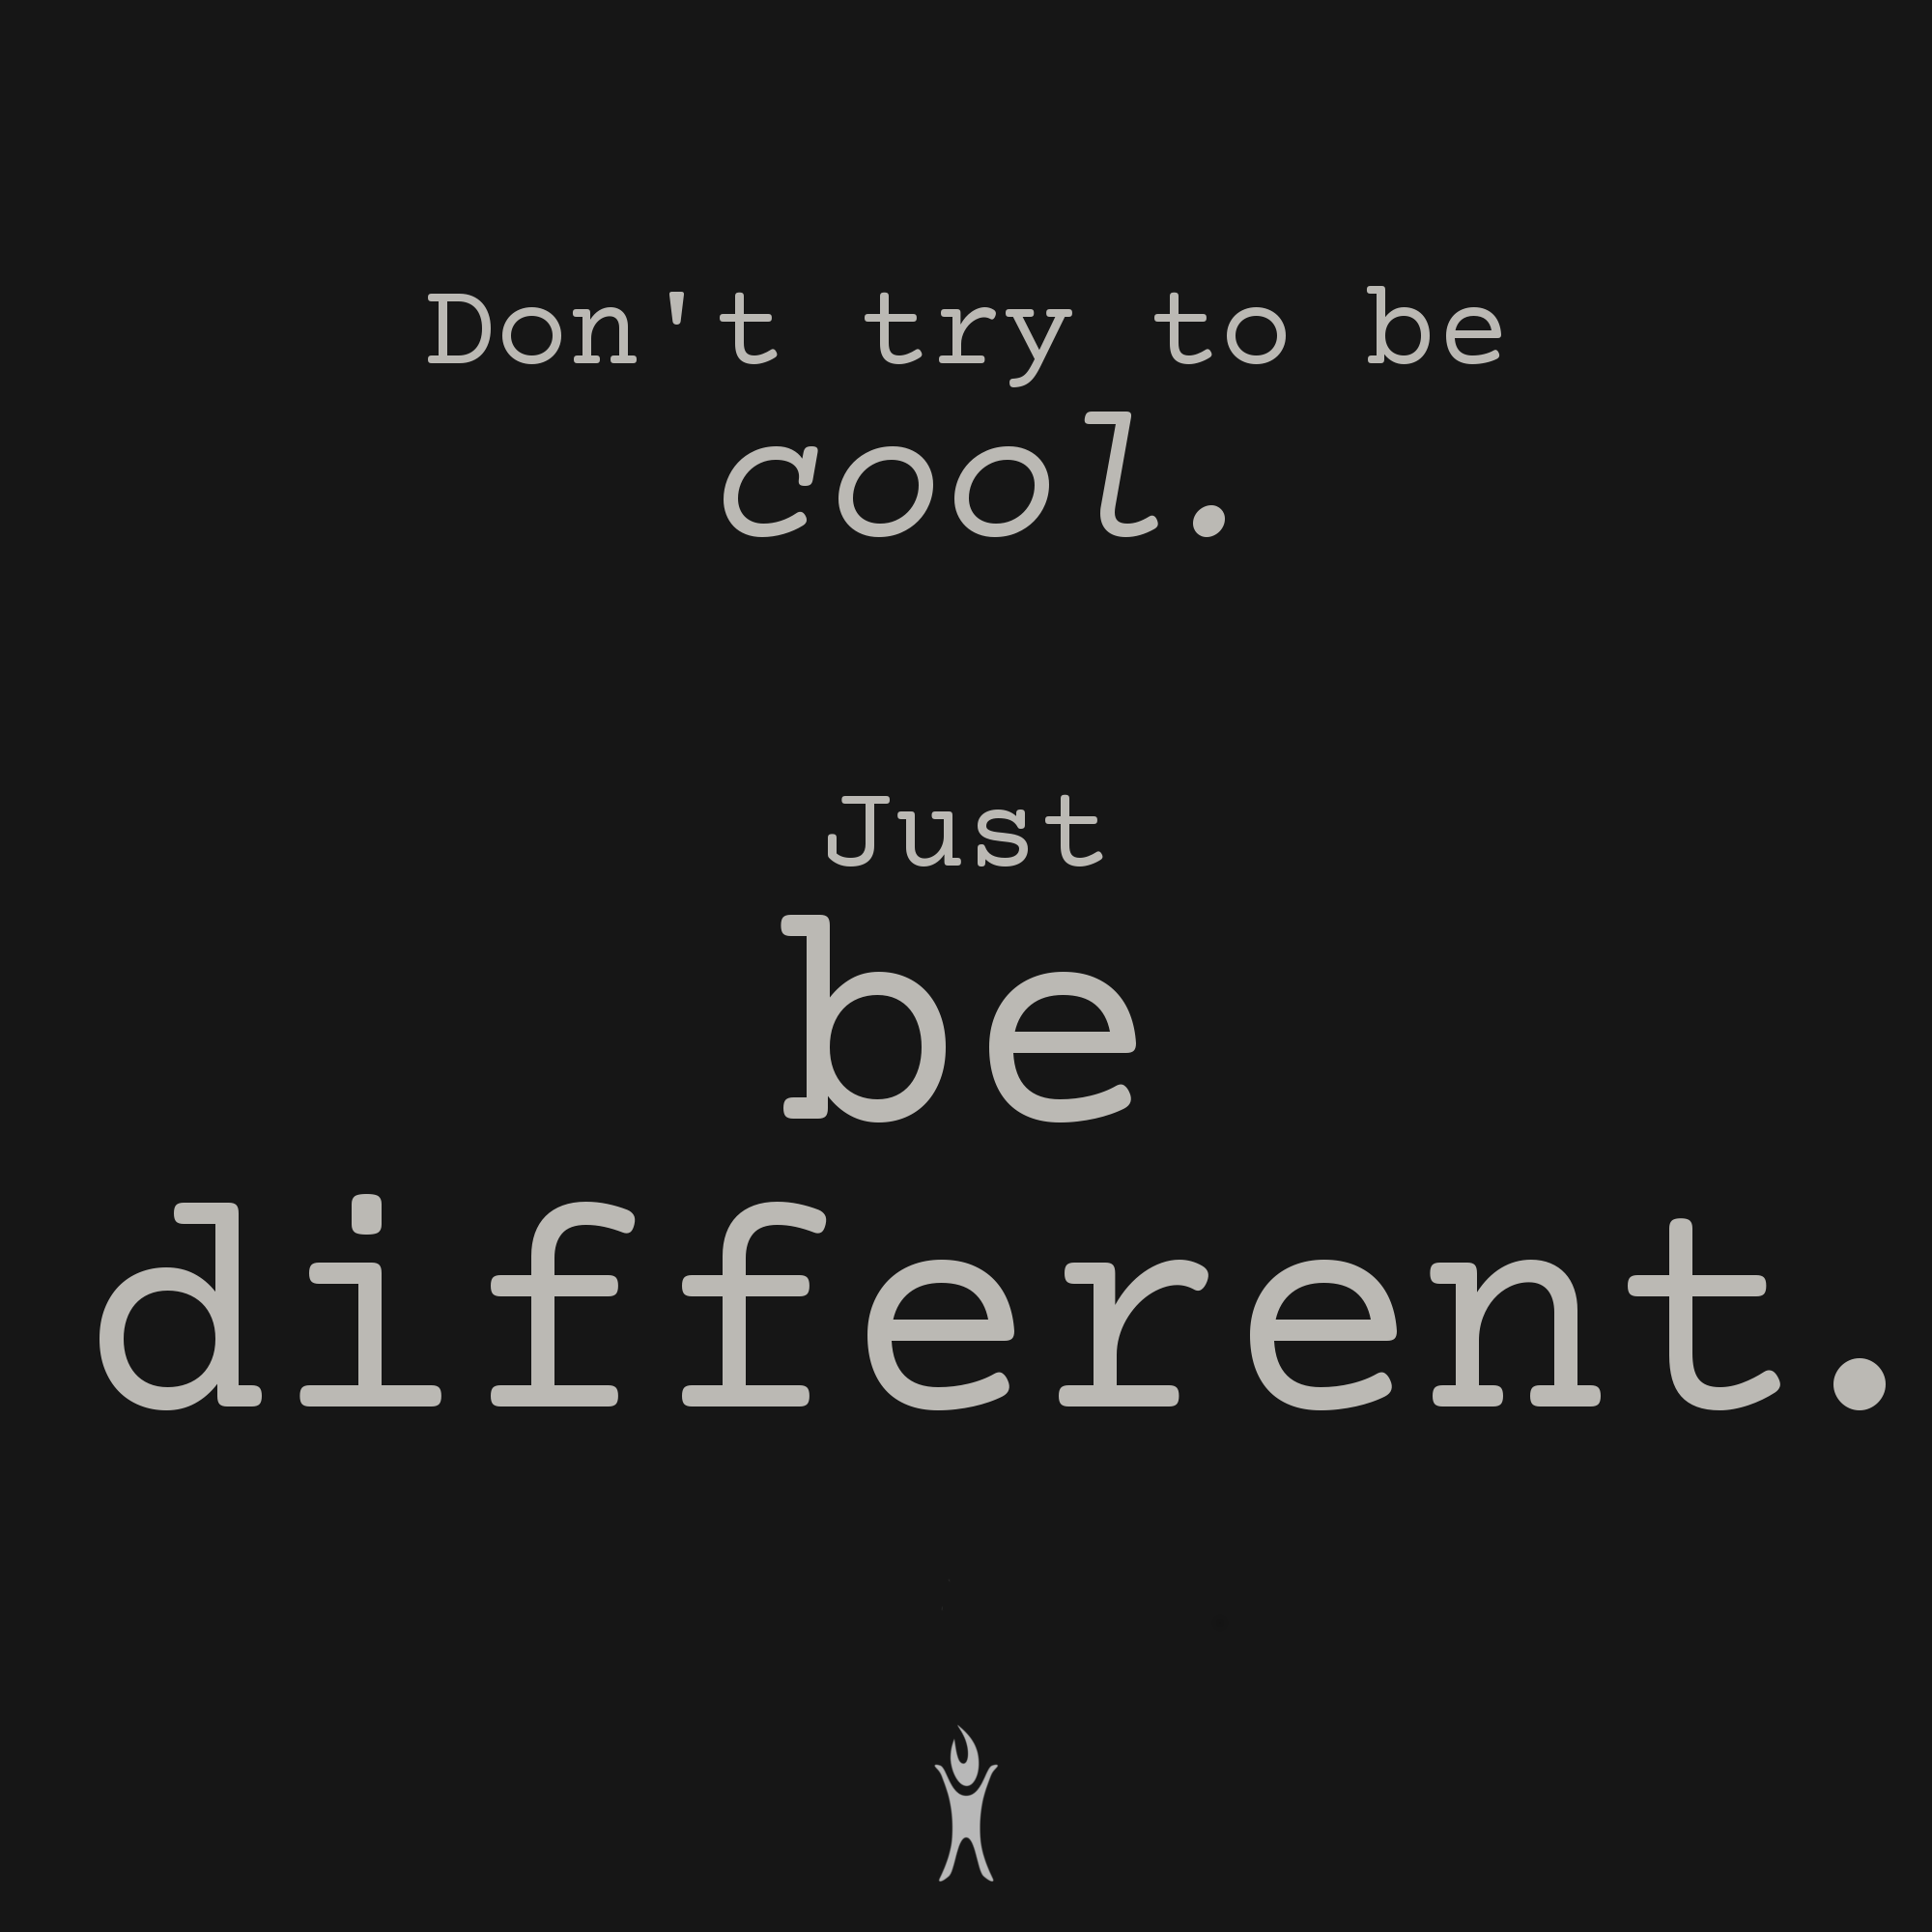 Don't try to be cool. Just be different.